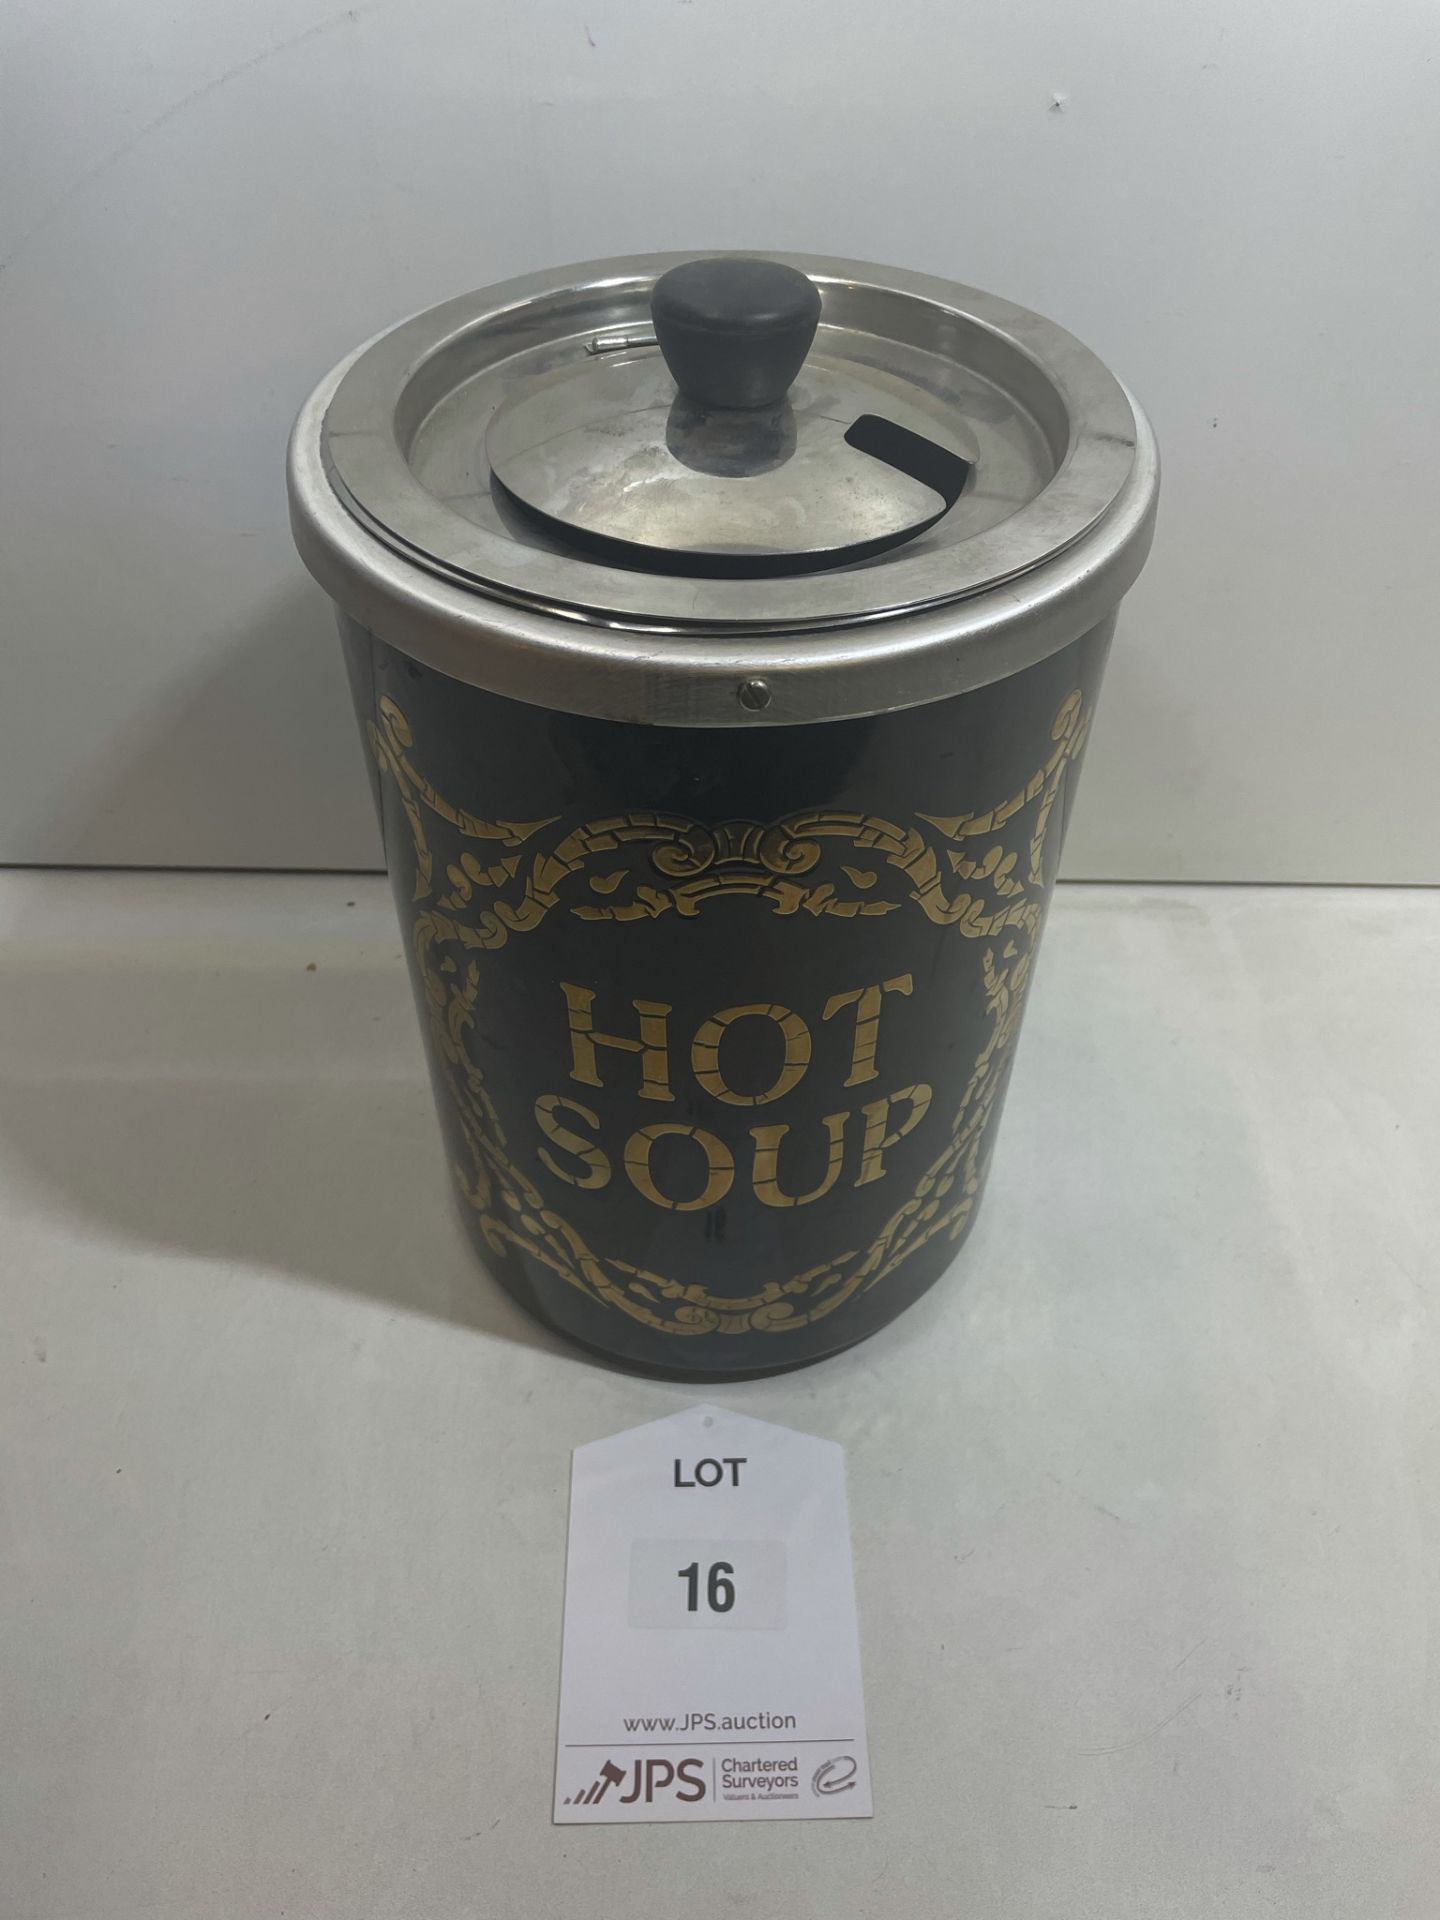 Victoria Baking Ovens 'HOT SOUP' Soupercan - Image 2 of 3